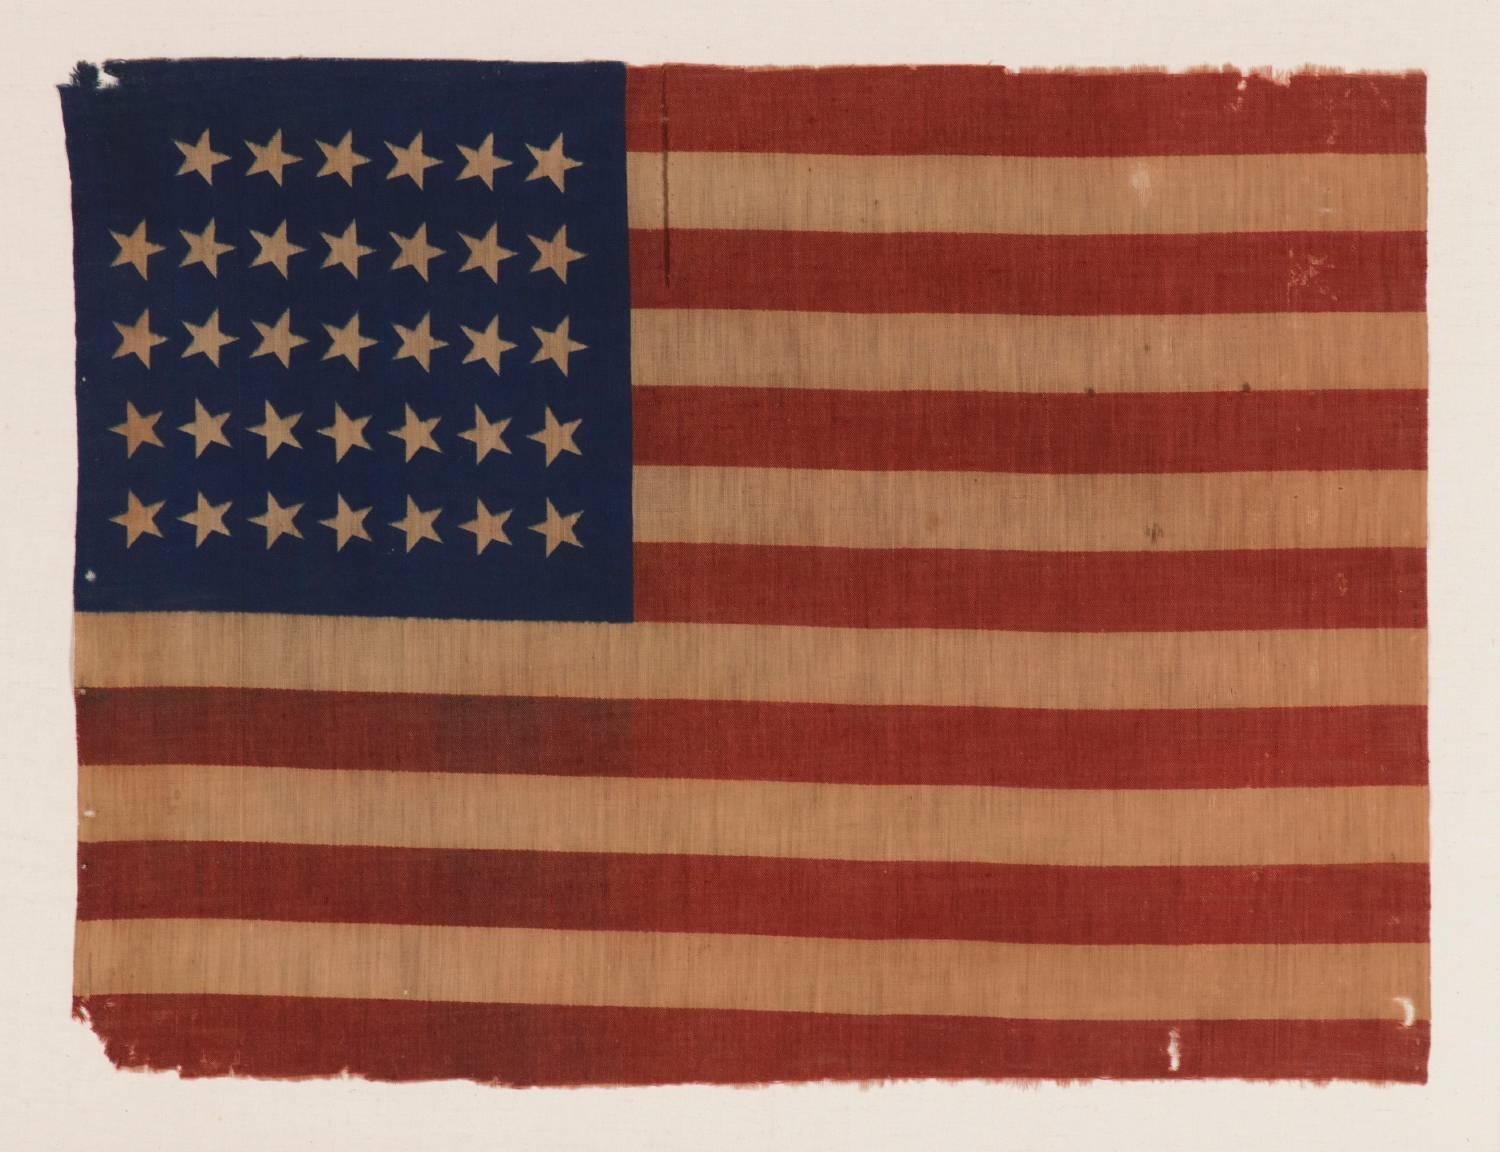 34 STARS, CIVIL WAR PERIOD, PRINTED ON A WOOL BLENDED FABRIC, RARE NOTCHED DESIGN WITH TILTED STARS, POSSIBLY A UNION ARMY CAMP COLORS:

34 star American national flag, printed on a wool and cotton blend. The star configuration, which leaves a